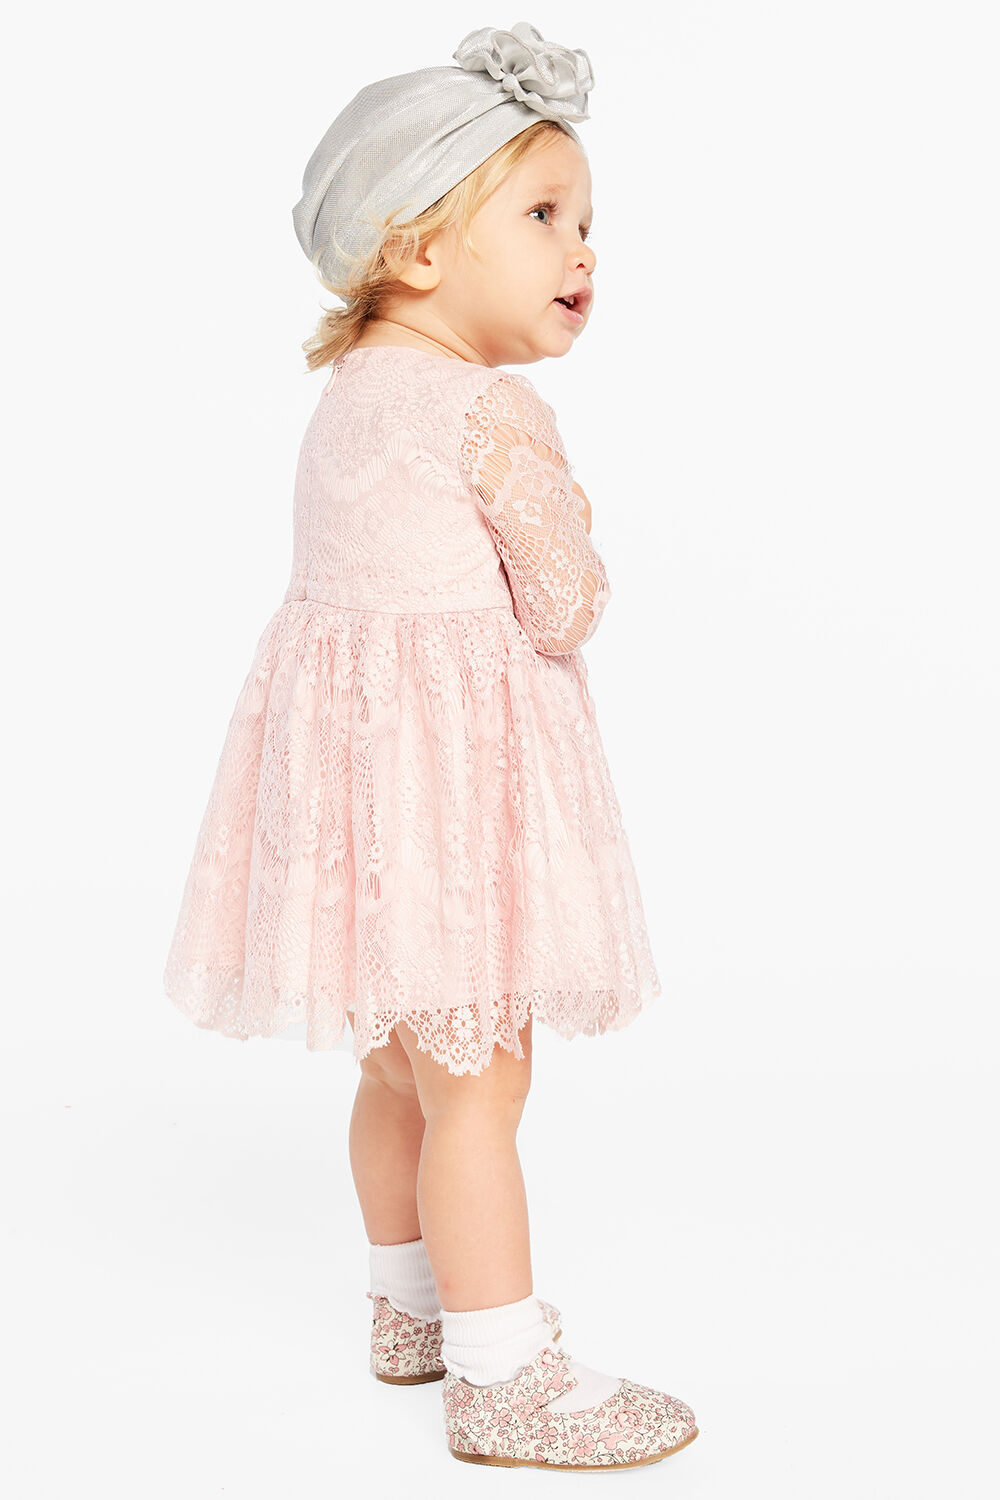 BABY GIRL GERTRUDE LACE DRESS in colour TUSCANY